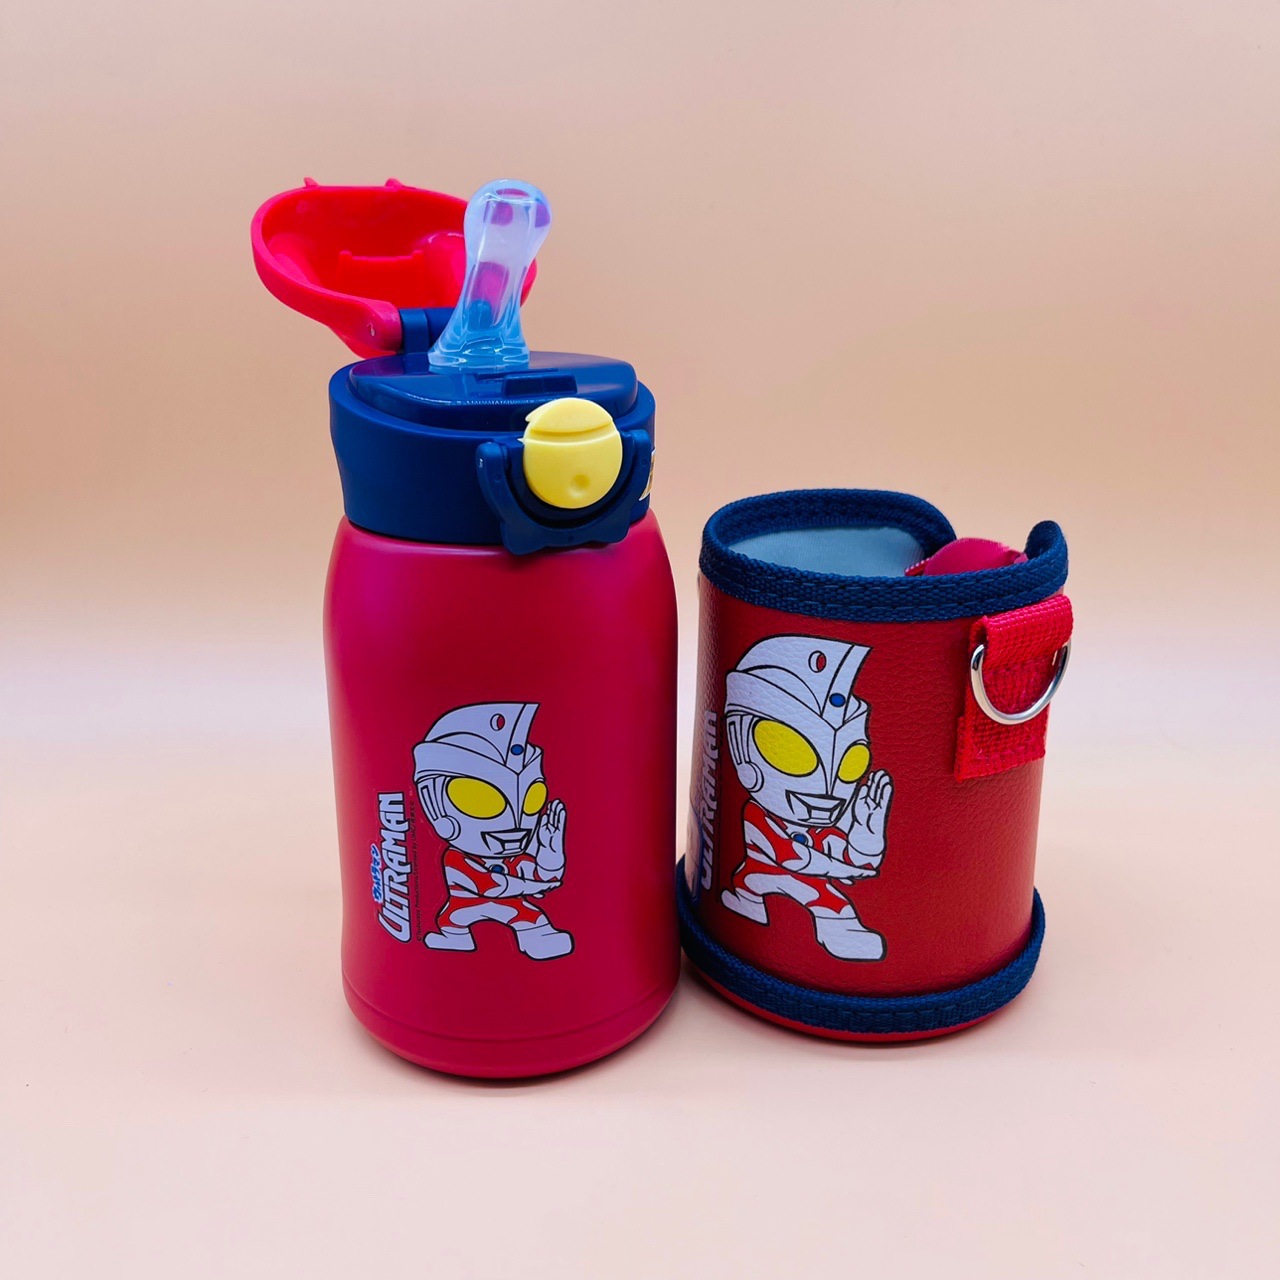 New Children's Thermos Mug Stainless Steel Double Cover Cup with Straw Kindergarten Student's Portable Water Bottle 500ml Bullet Cup